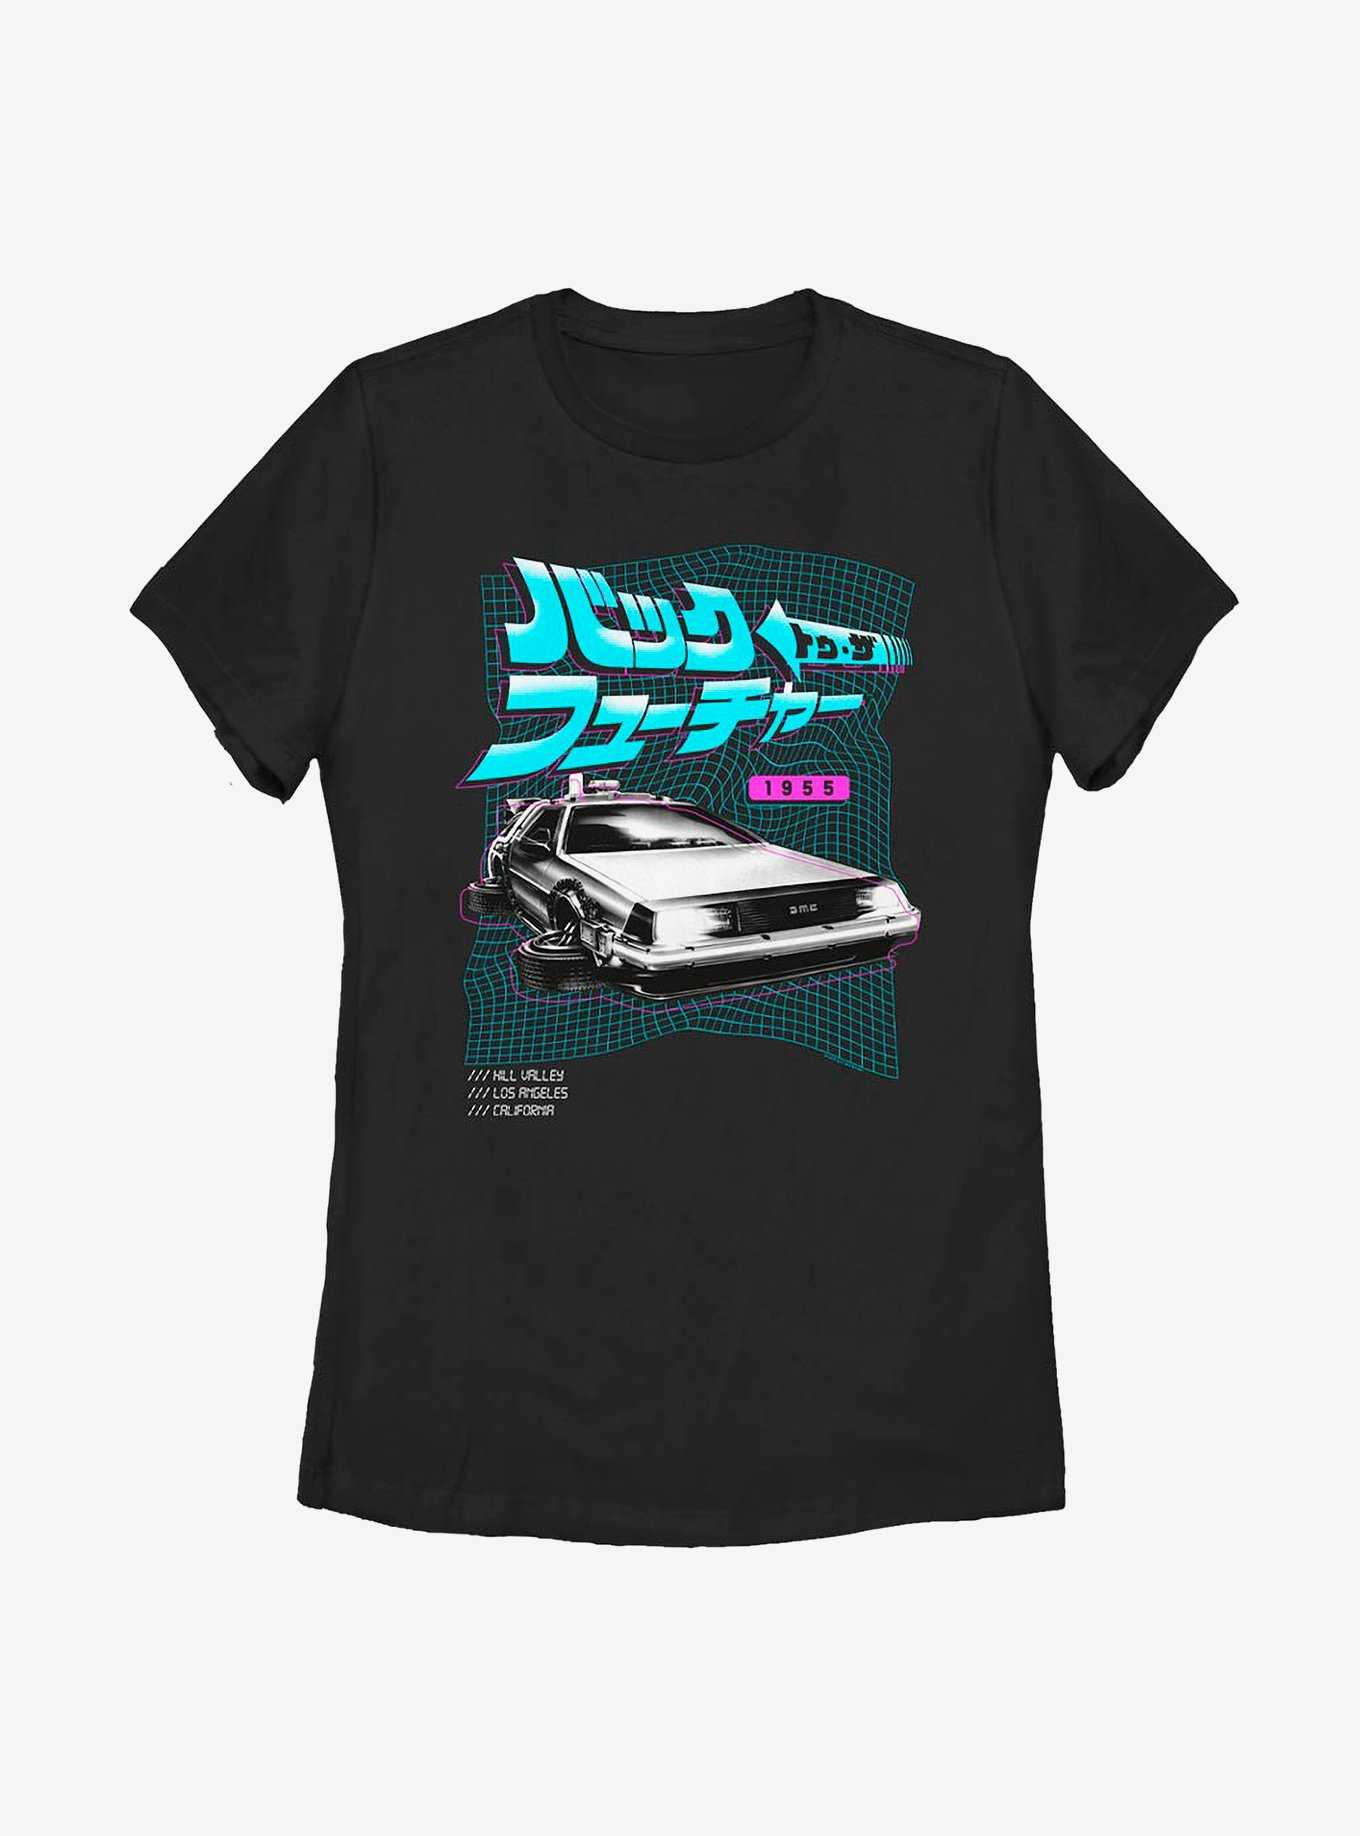 Back To The Future Japanese Text DeLorean Womens T-Shirt, , hi-res